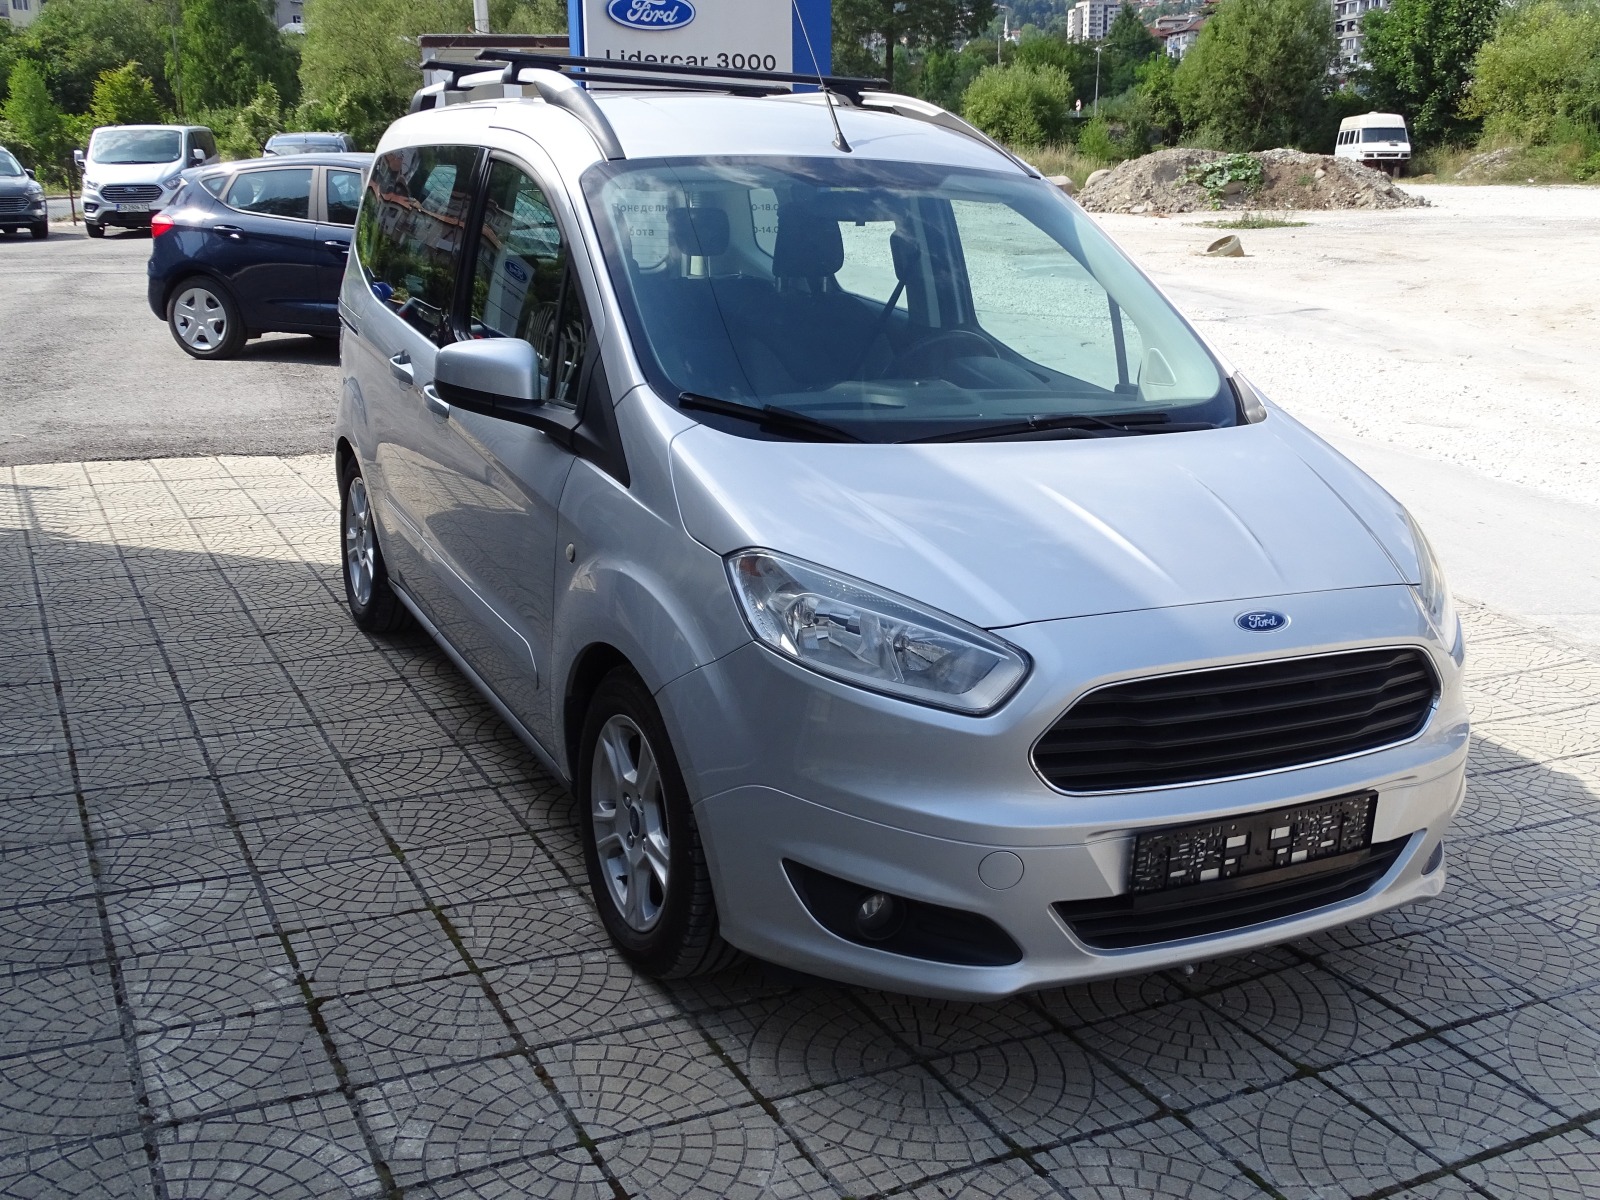 Ford Courier 1.6 Duratorq - [1] 